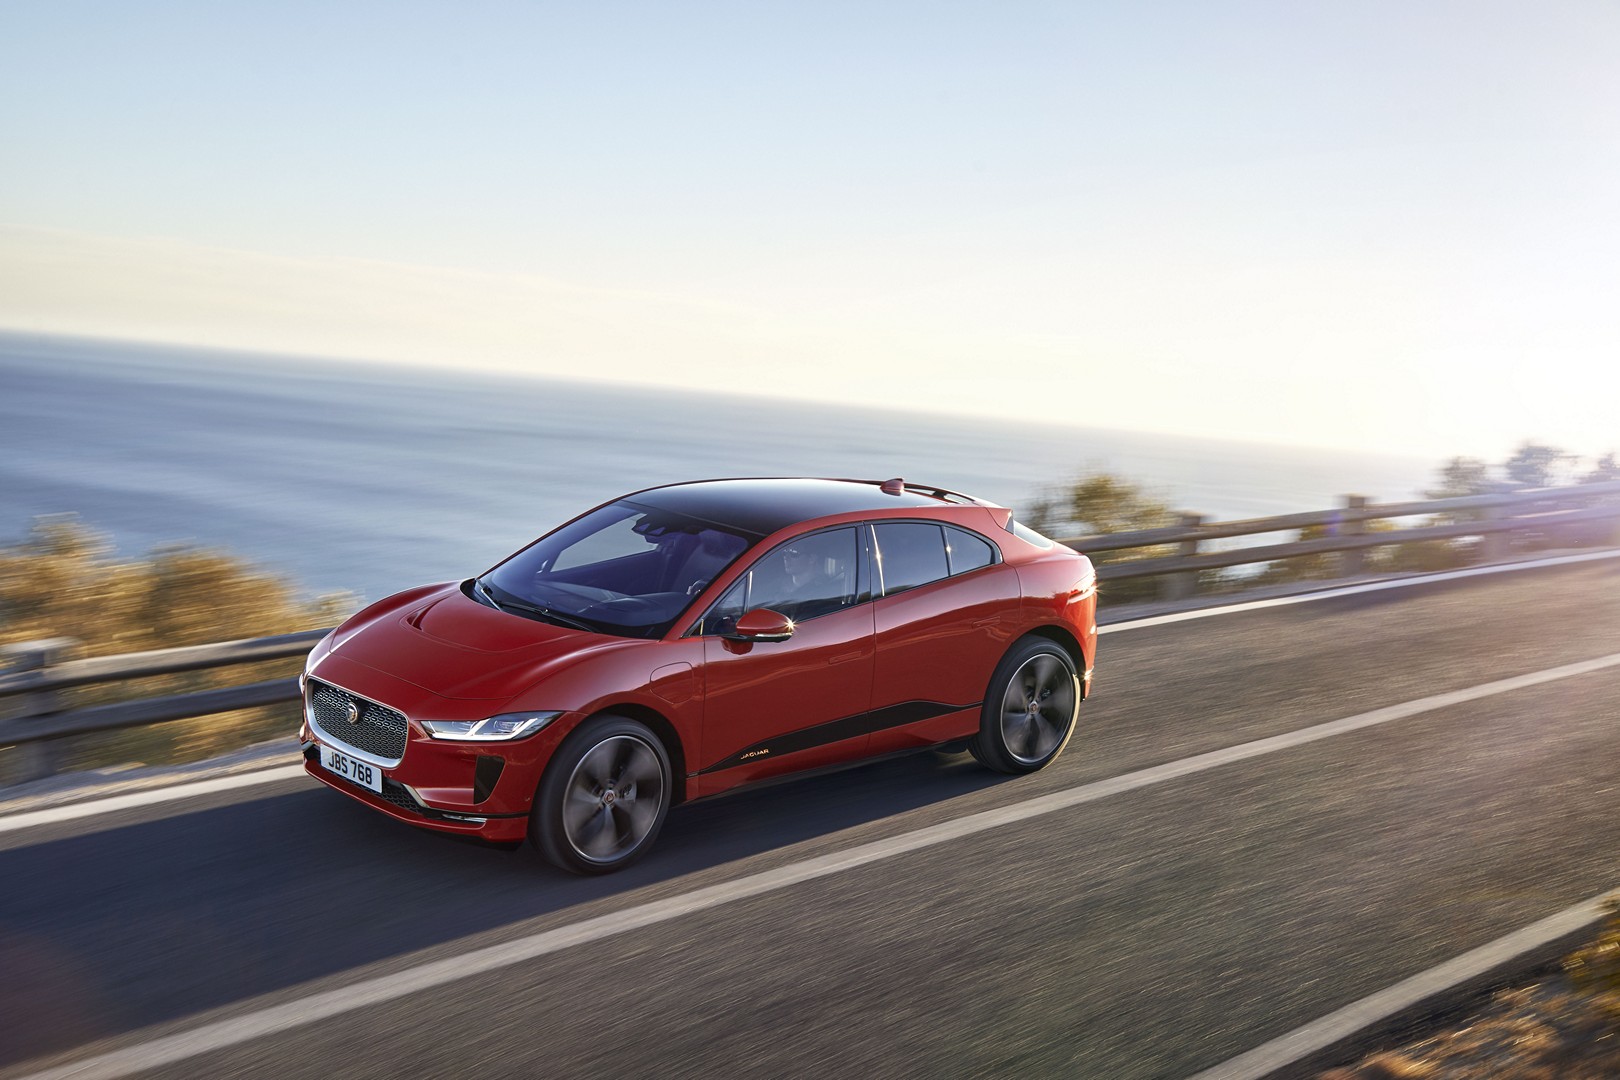 https://s1.cdn.autoevolution.com/images/news/gallery/2020-jaguar-i-pace-update-offers-234-miles-of-range-thanks-to-etrophy-know-how_79.jpg